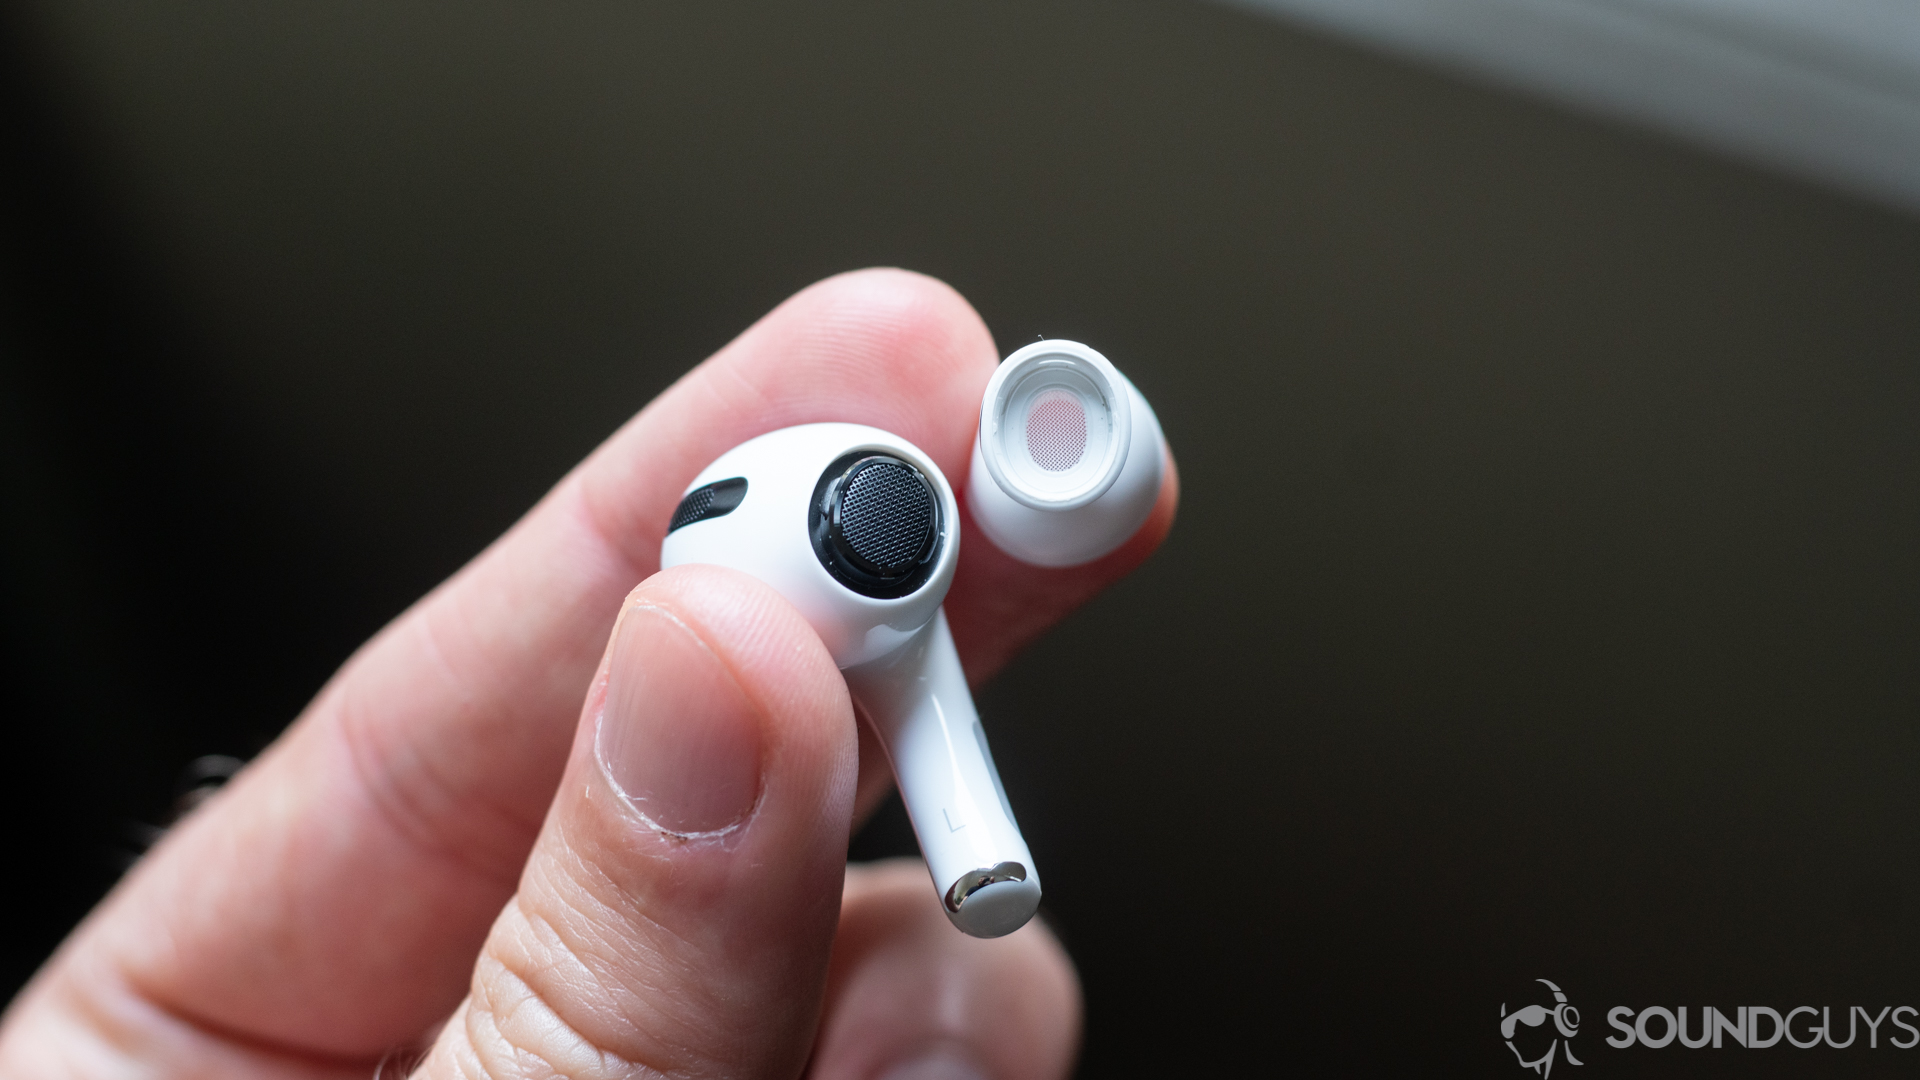 A photo of the Apple AirPods Pro earphone silicone tip removed from the earpiece and in a man's hand.